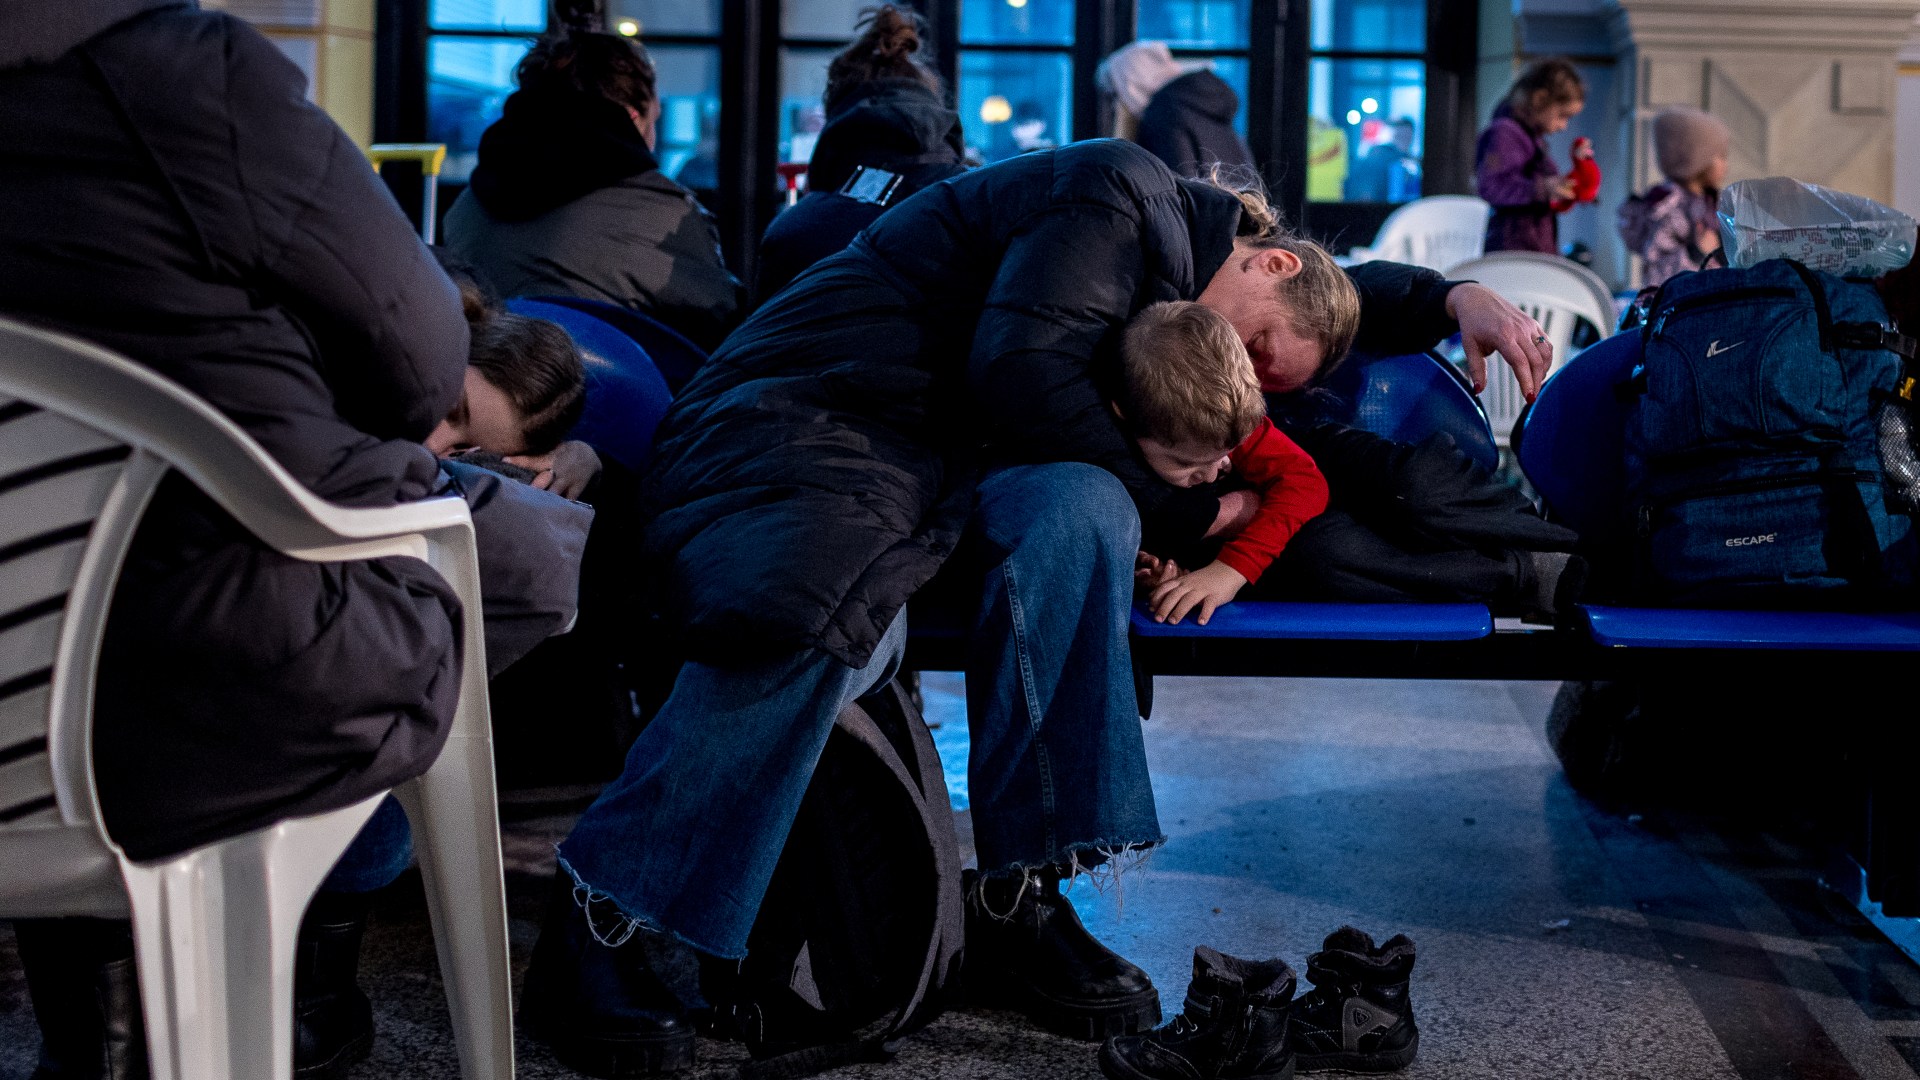 A woman and child sleep in a train station